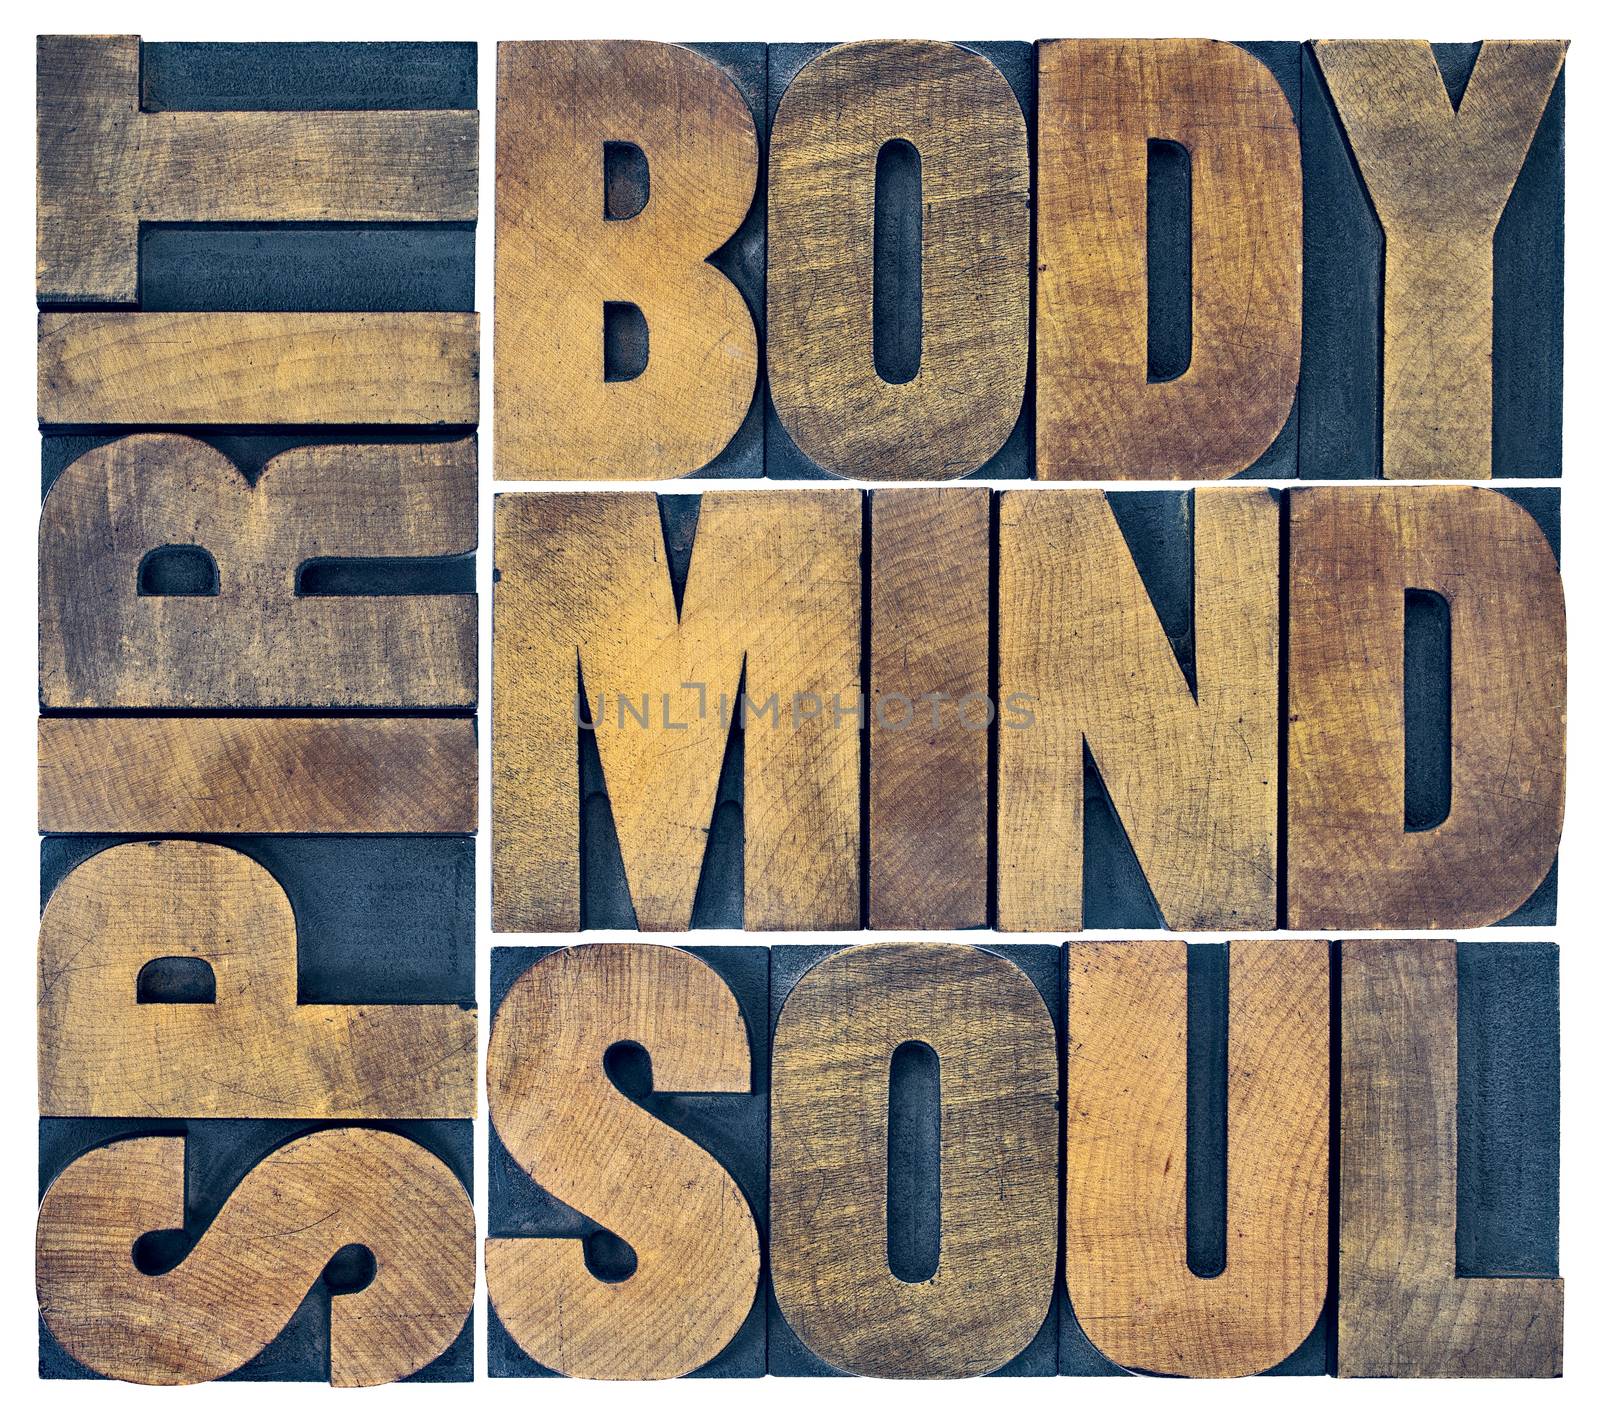 body, mind, soul and spirit word abstract - a collage of isolated text in vintage grunge wood letterpress printing blocks